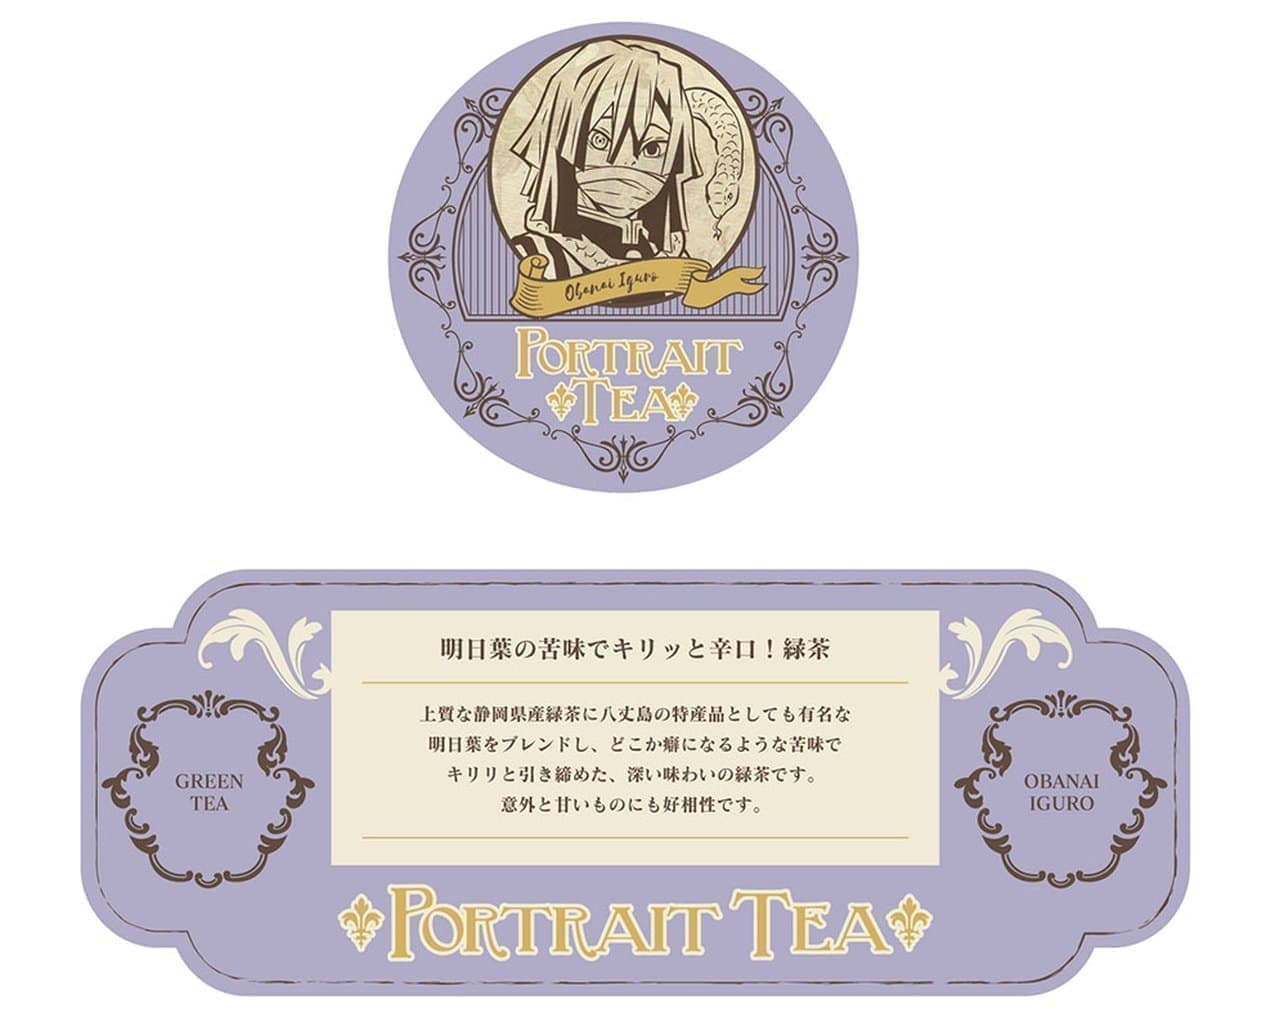 Flavored tea inspired by the character of "Demon Slayer"